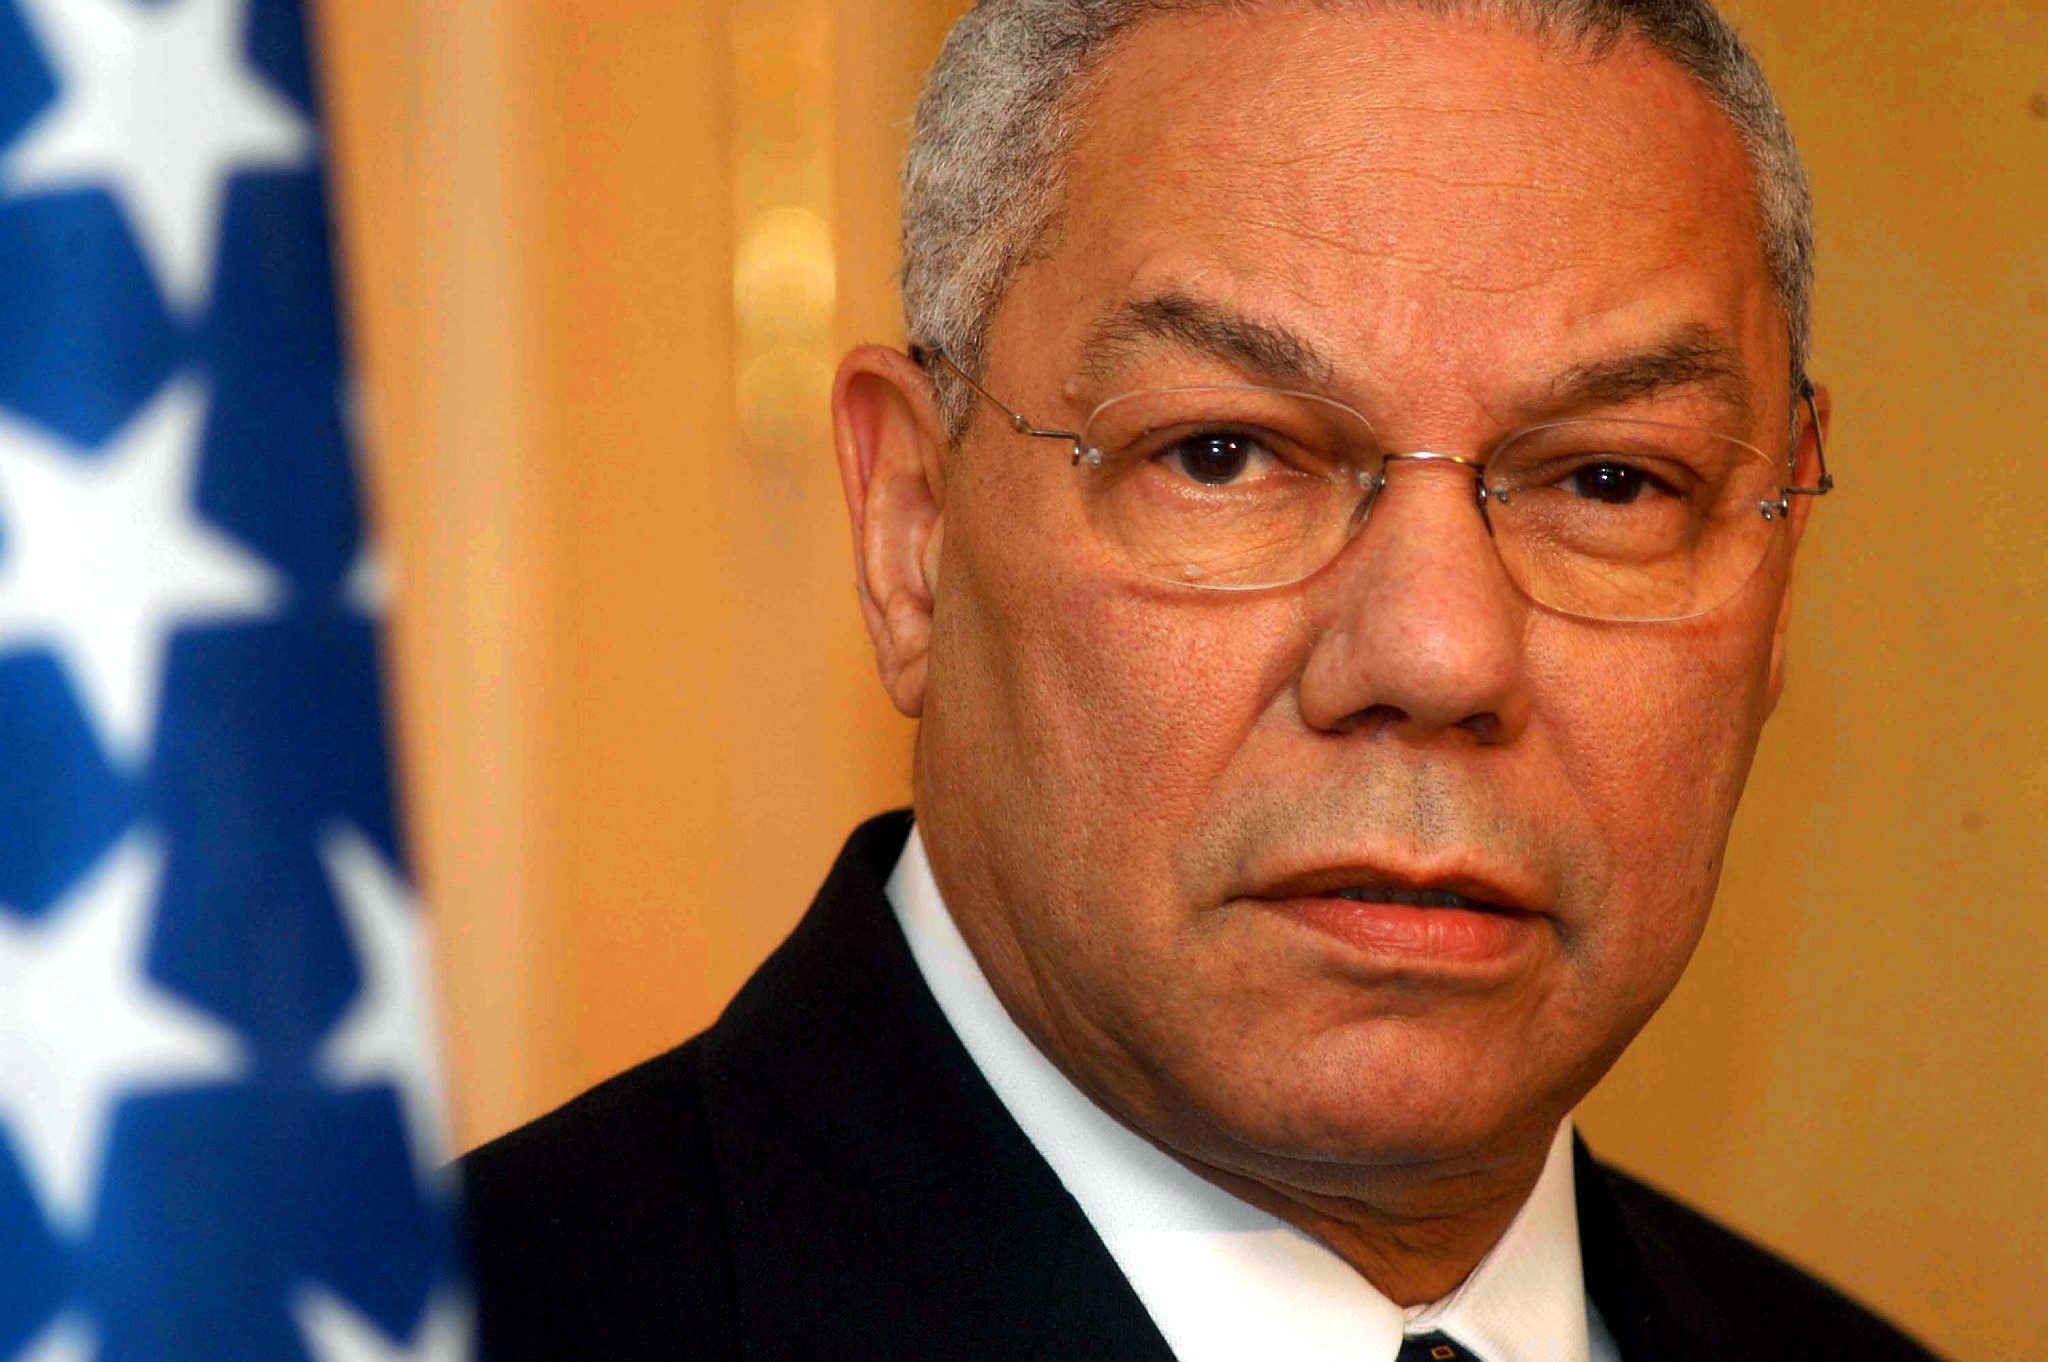 <p>Colin Powell, who served as U.S. secretary of state from 2001 to 2005 -- and was the first Black person ever to do so -- <a href="https://www.wonderwall.com/celebrity/celebs-politicians-mourn-the-passing-of-gen.-colin-powell-510606.gallery">died on Oct. 18, 2021, following a battle with the coronavirus</a>, his family announced. The former four-star general and Vietnam veteran, 84, was fully vaccinated, they revealed, but he also suffered from multiple myeloma, a cancer of plasma cells that suppresses the body's immune response, the former general's longtime chief of staff, Peggy Cifrino, confirmed to CNN, adding that the leader "also had Parkinson's, which put him at high risk with an immuno compromised system." </p>